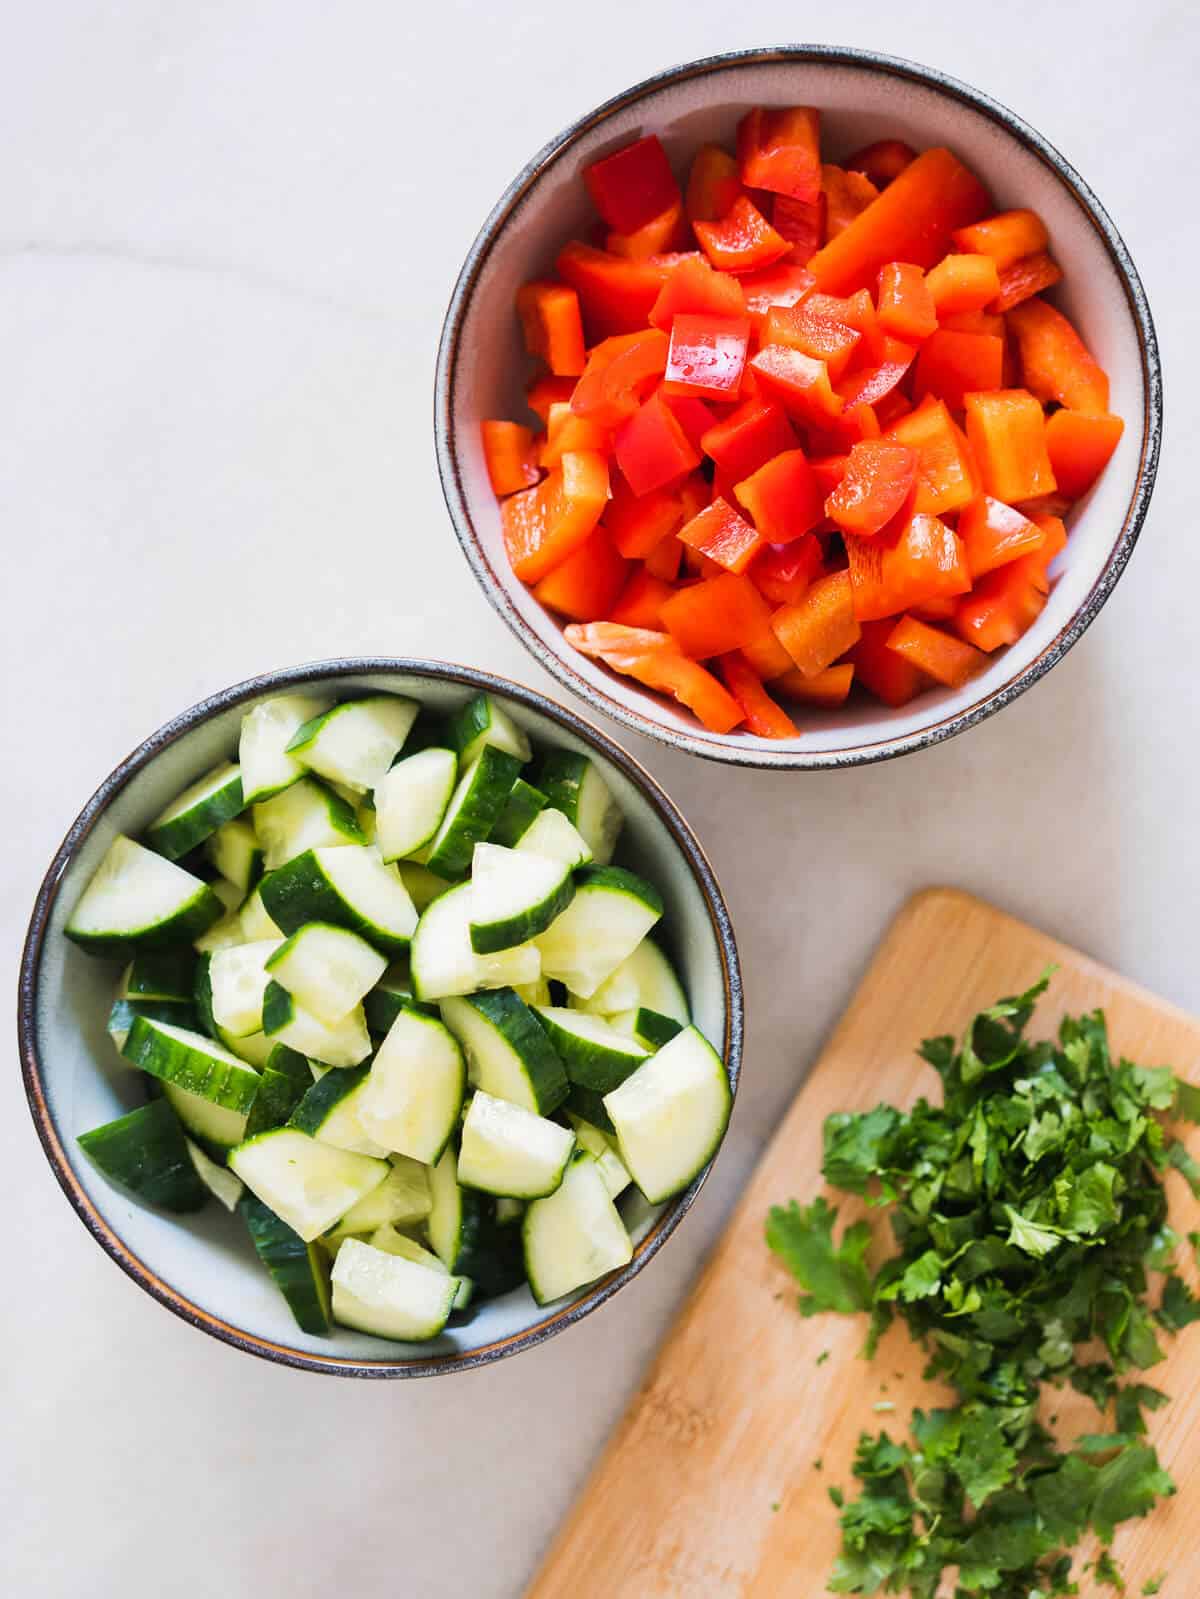 chopped red bell pepper, cucumber, and cilantro leaves.